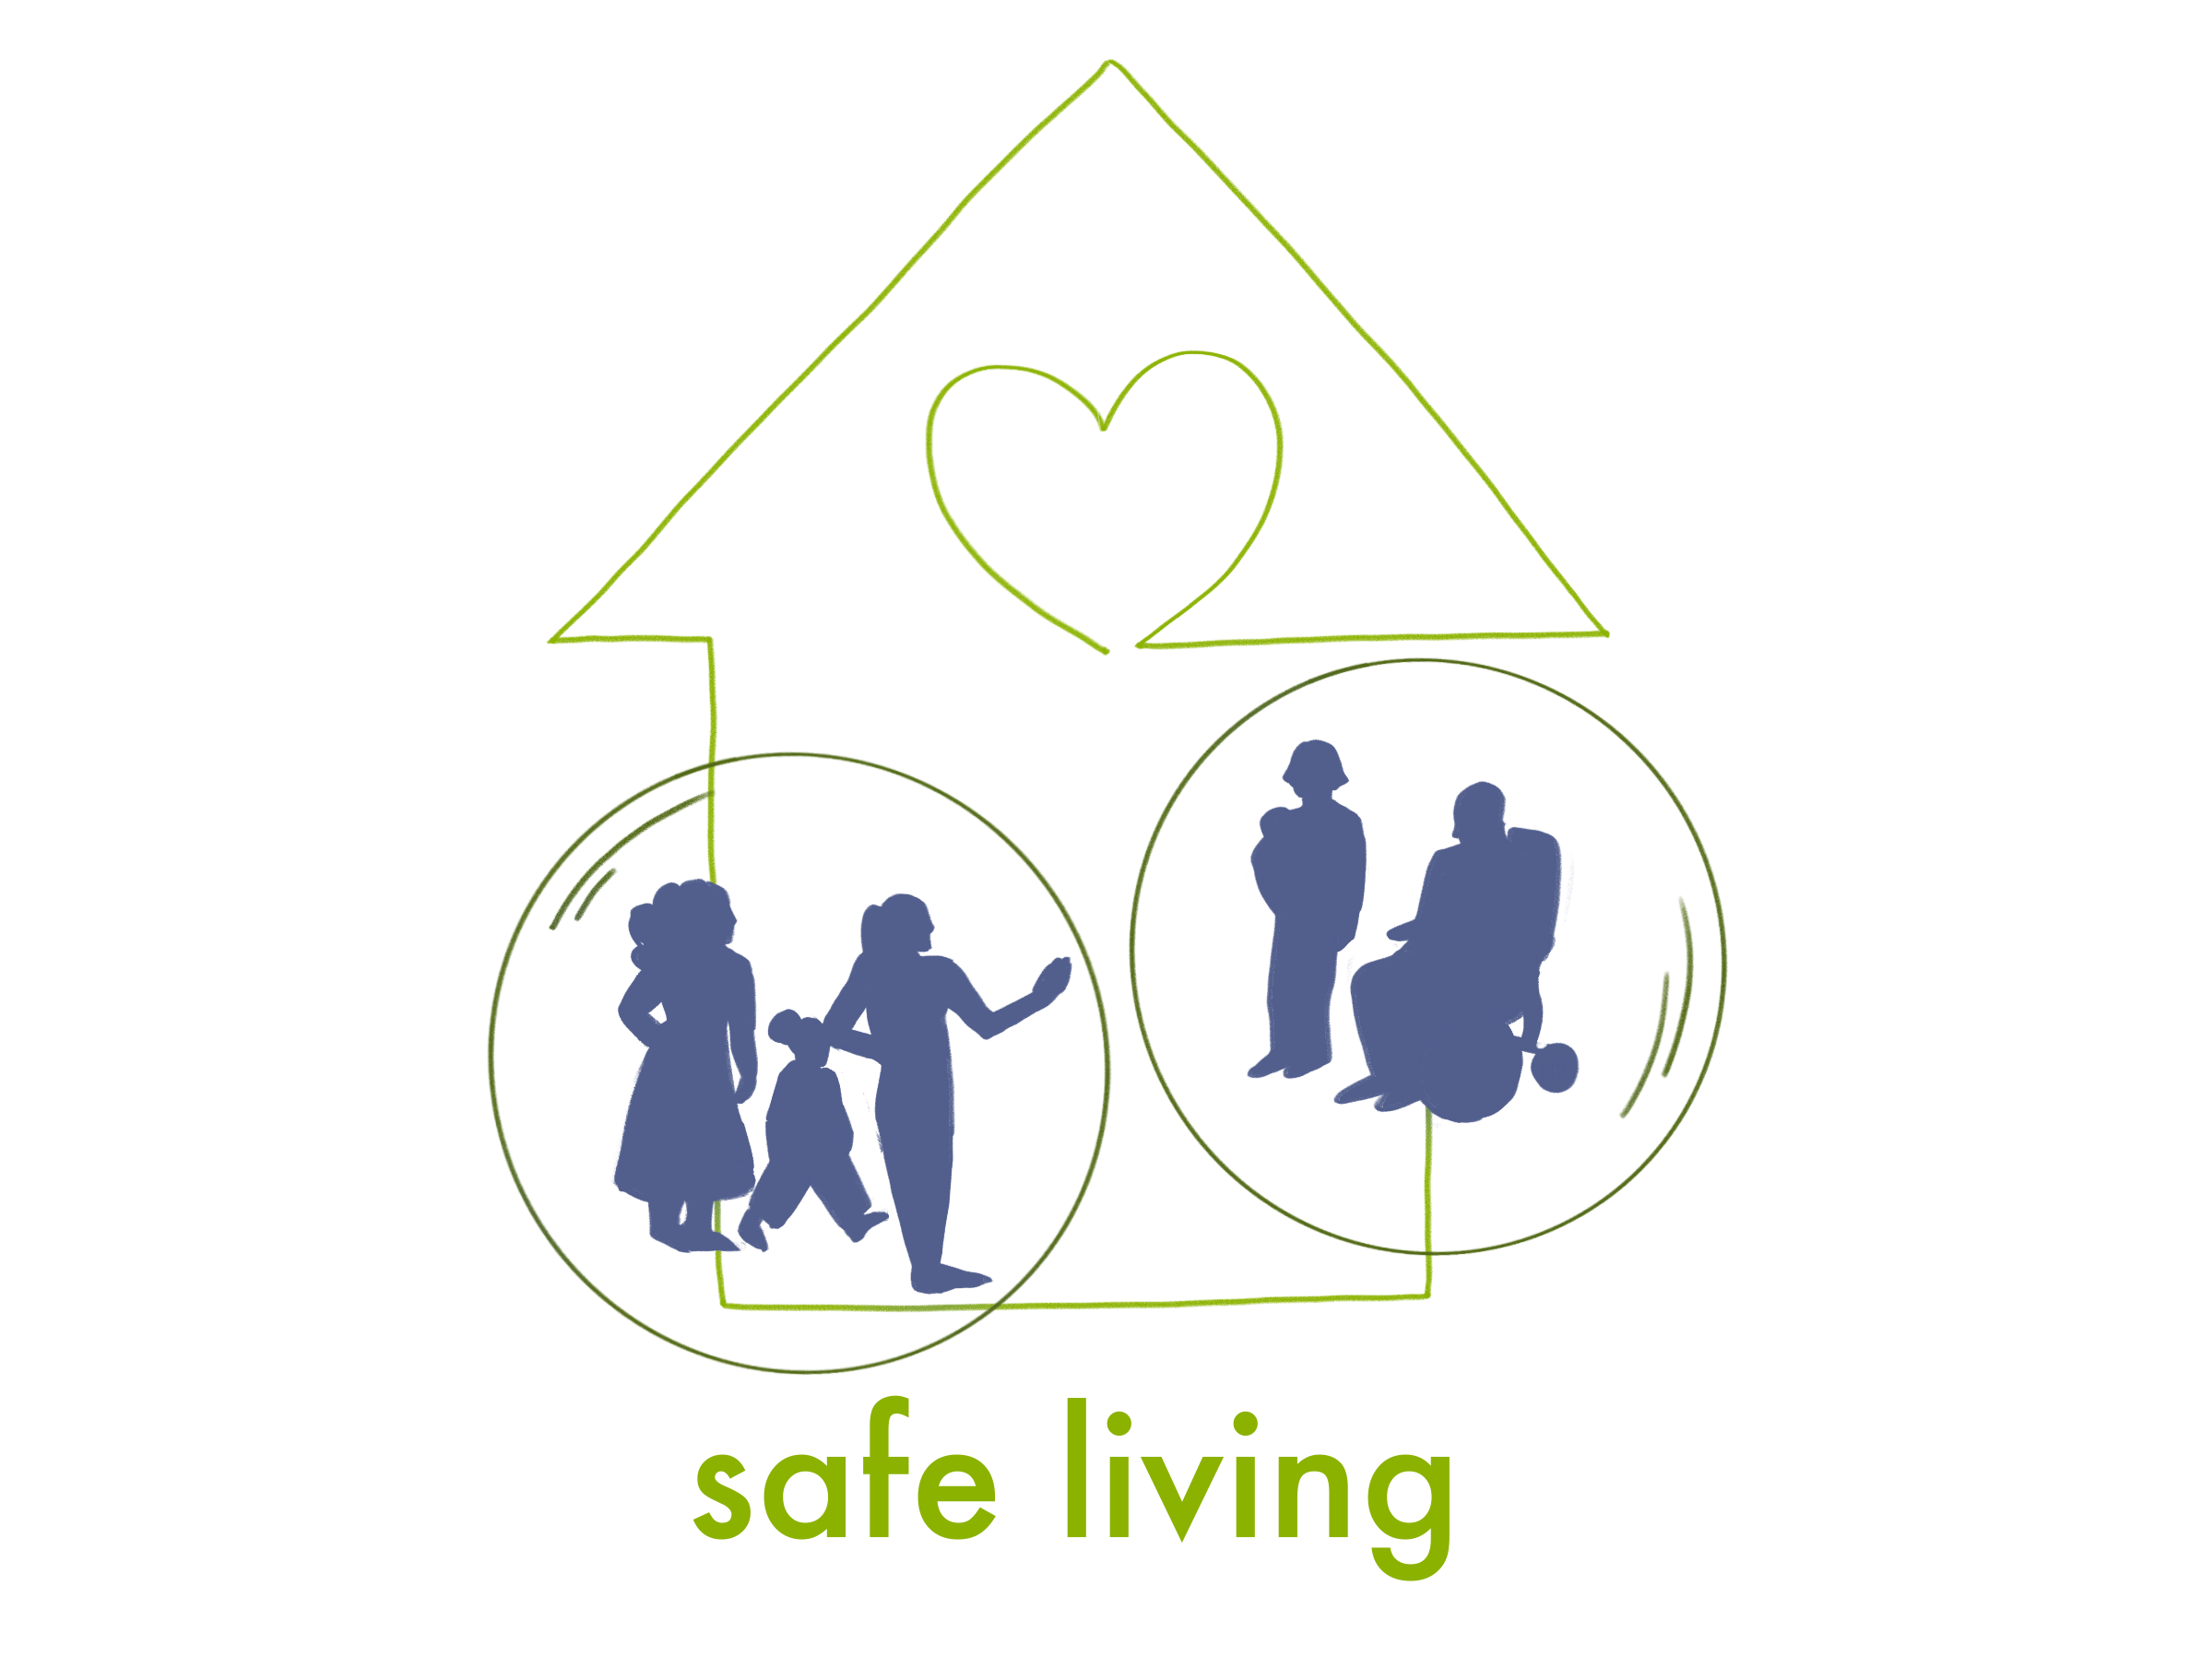 Safelviing Logo of people surrounded by the outline of a house